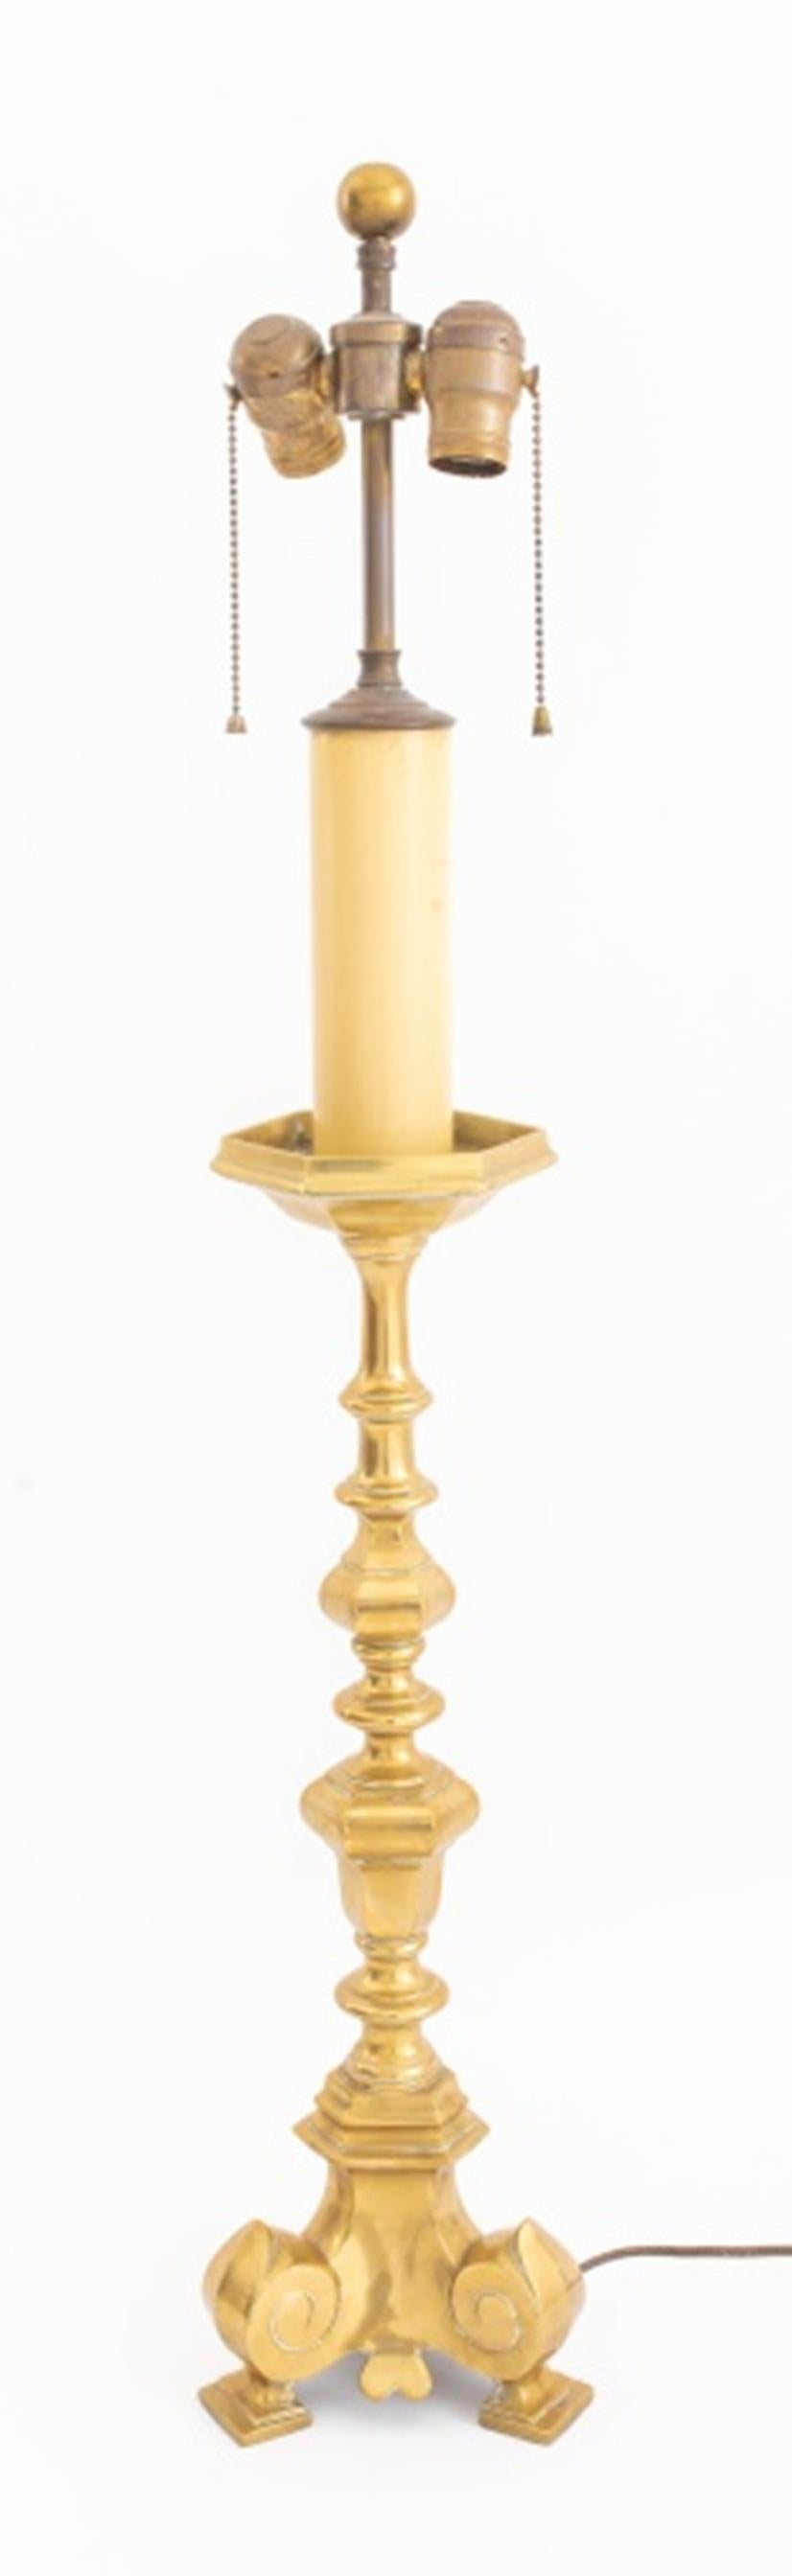 19th Century Neoclassical Brass Altar Candelabra Mounted Lamp For Sale